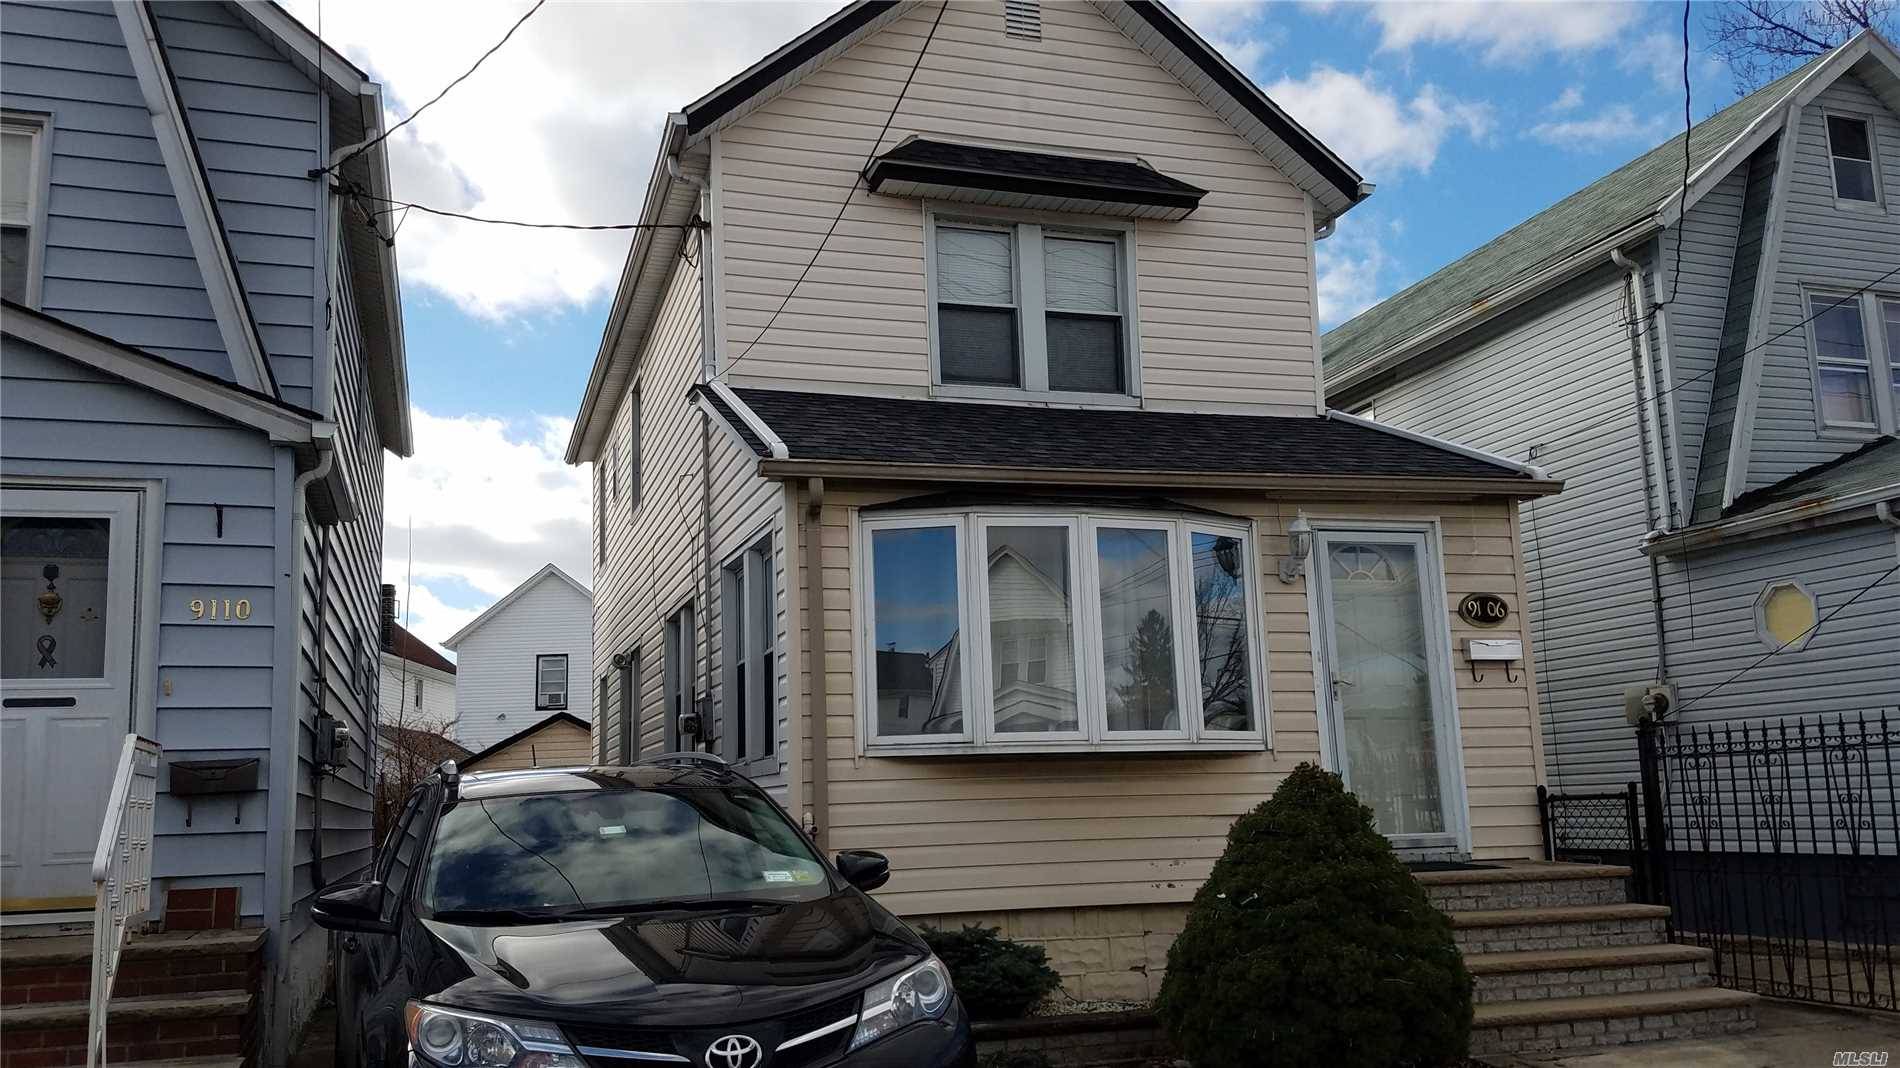 Spacious 3 Bedroom Colonial With Jacuzzi Bath, Hardwood Floors, Large Living Room, Full Dining Room 1 Car Garage, Private Driveway, Full Finished Basement.